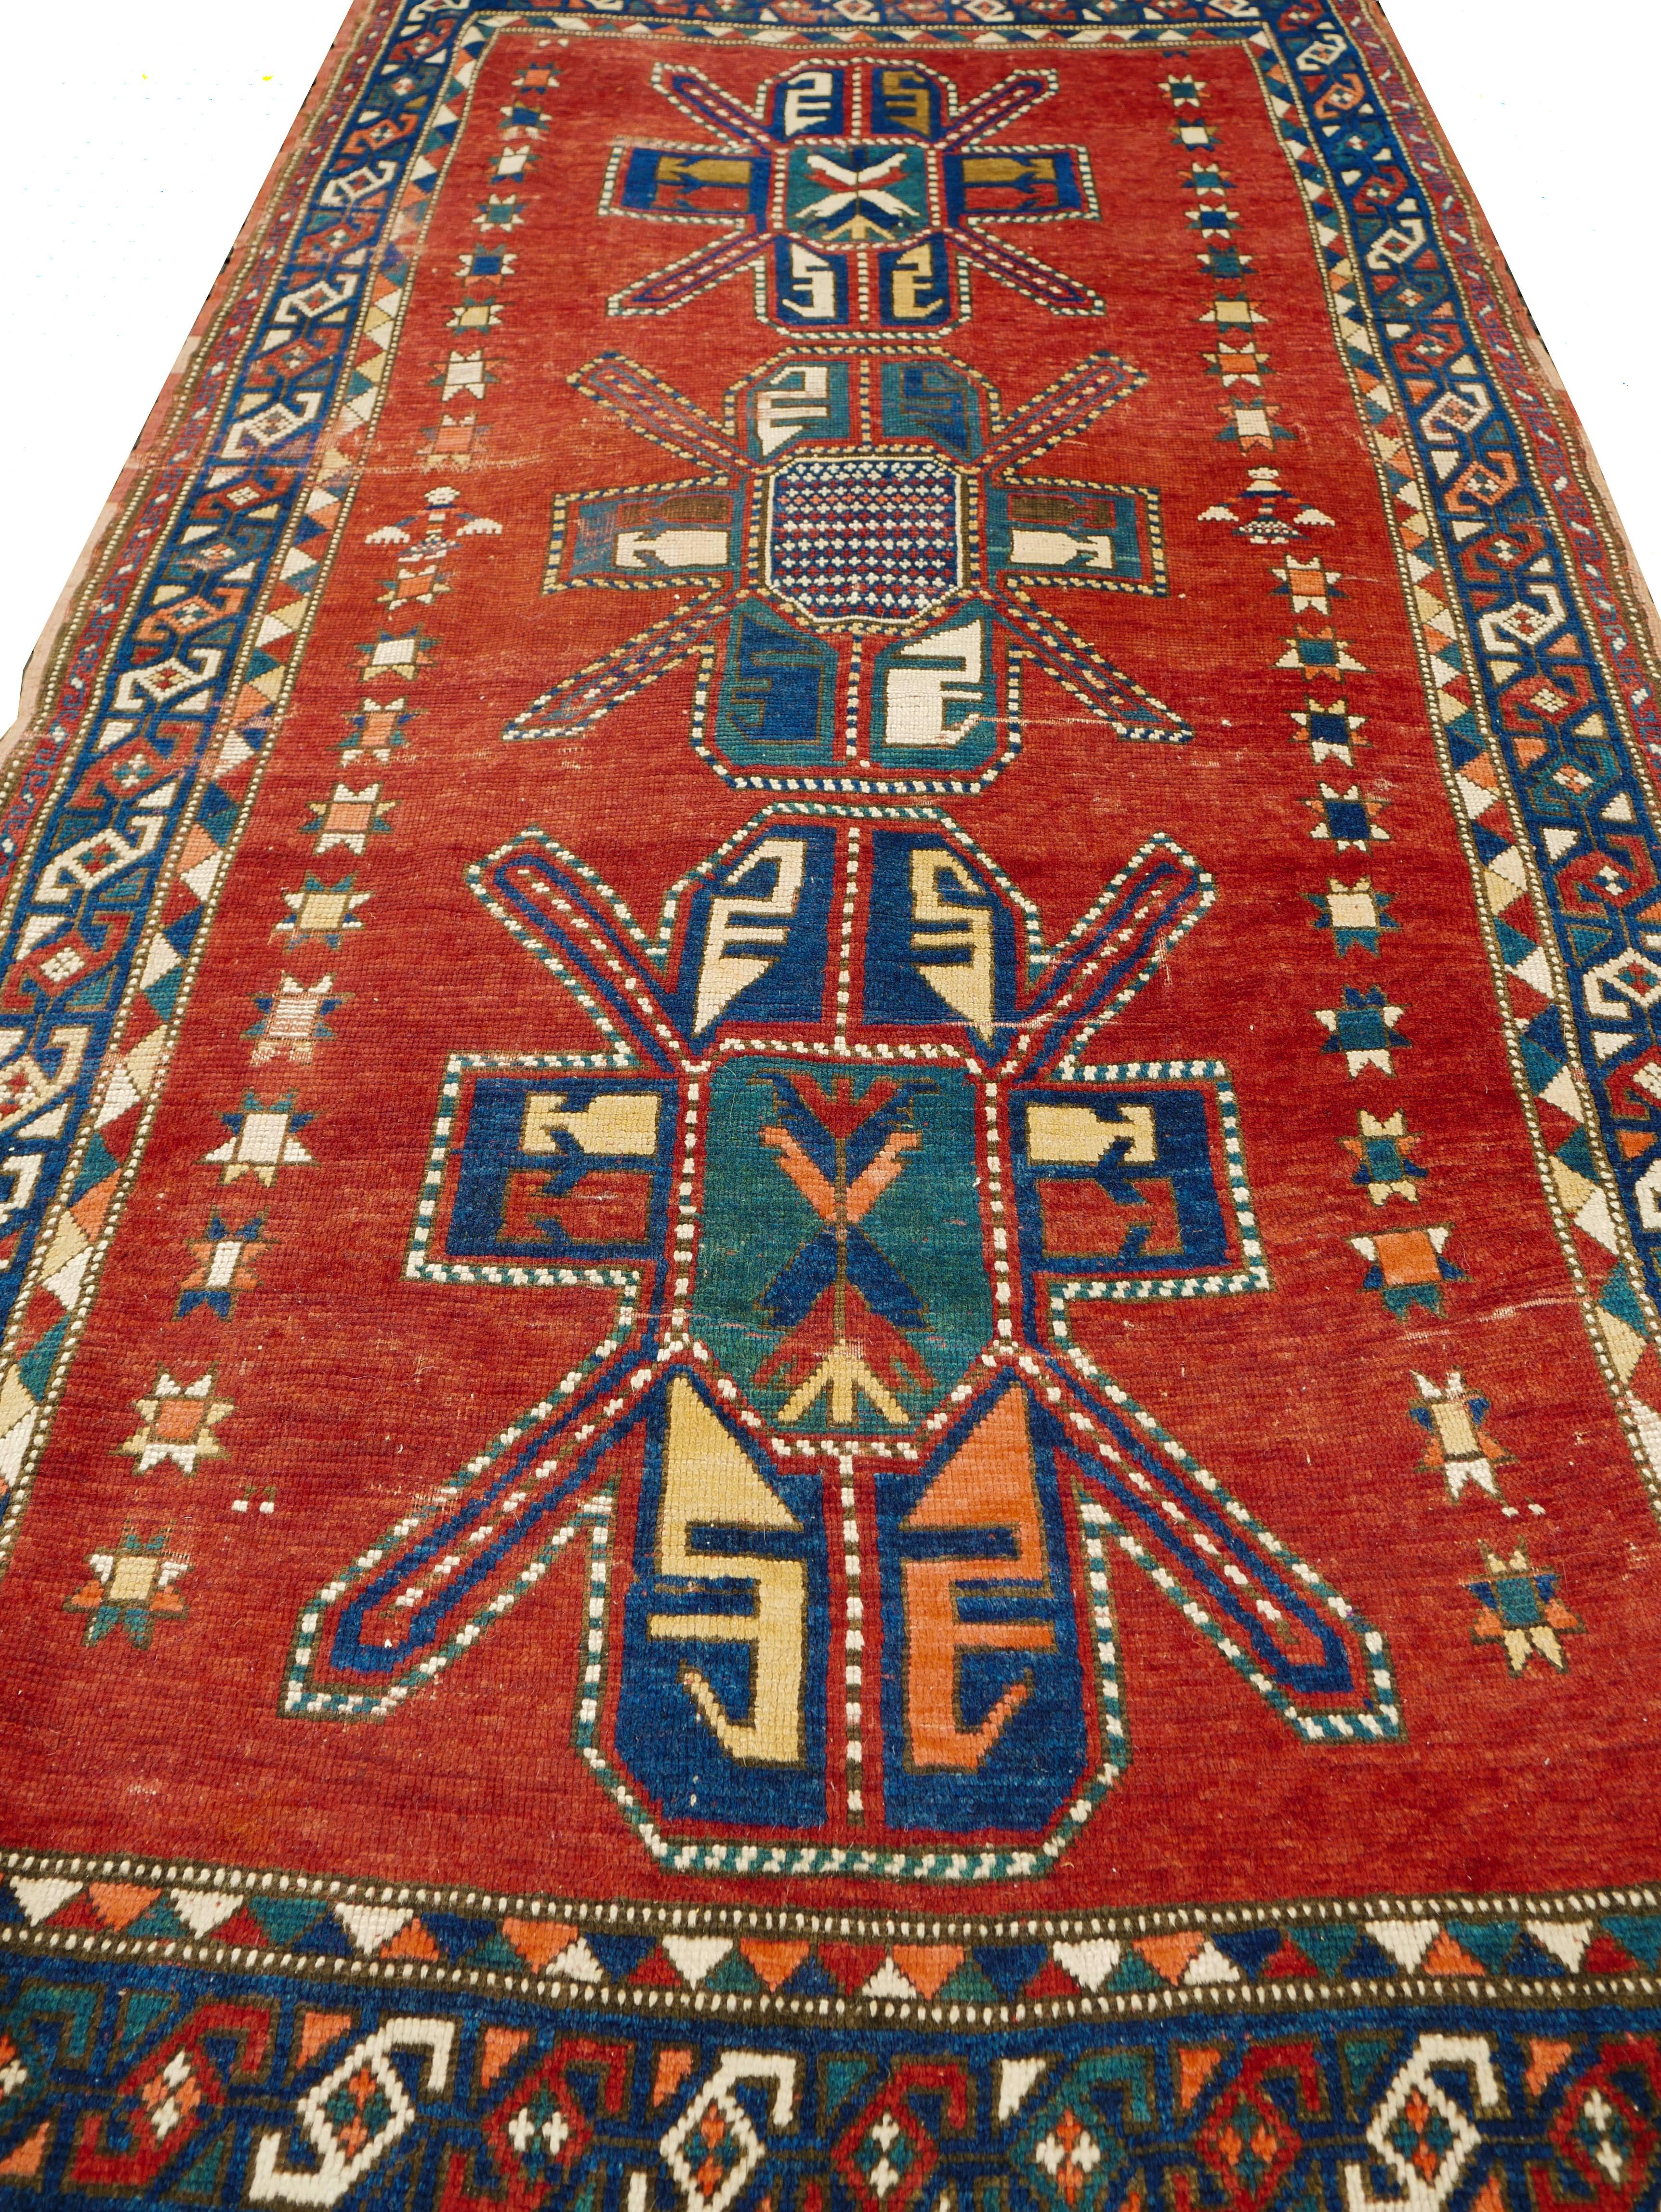 This is a spectacular collector's antique Caucasian Kazak rug dating to the second half of the 19th century (1860-1890) it features three different Seichour cruciform motifs referred to by western scholars as St. Andrew's cross. This carpet is in a